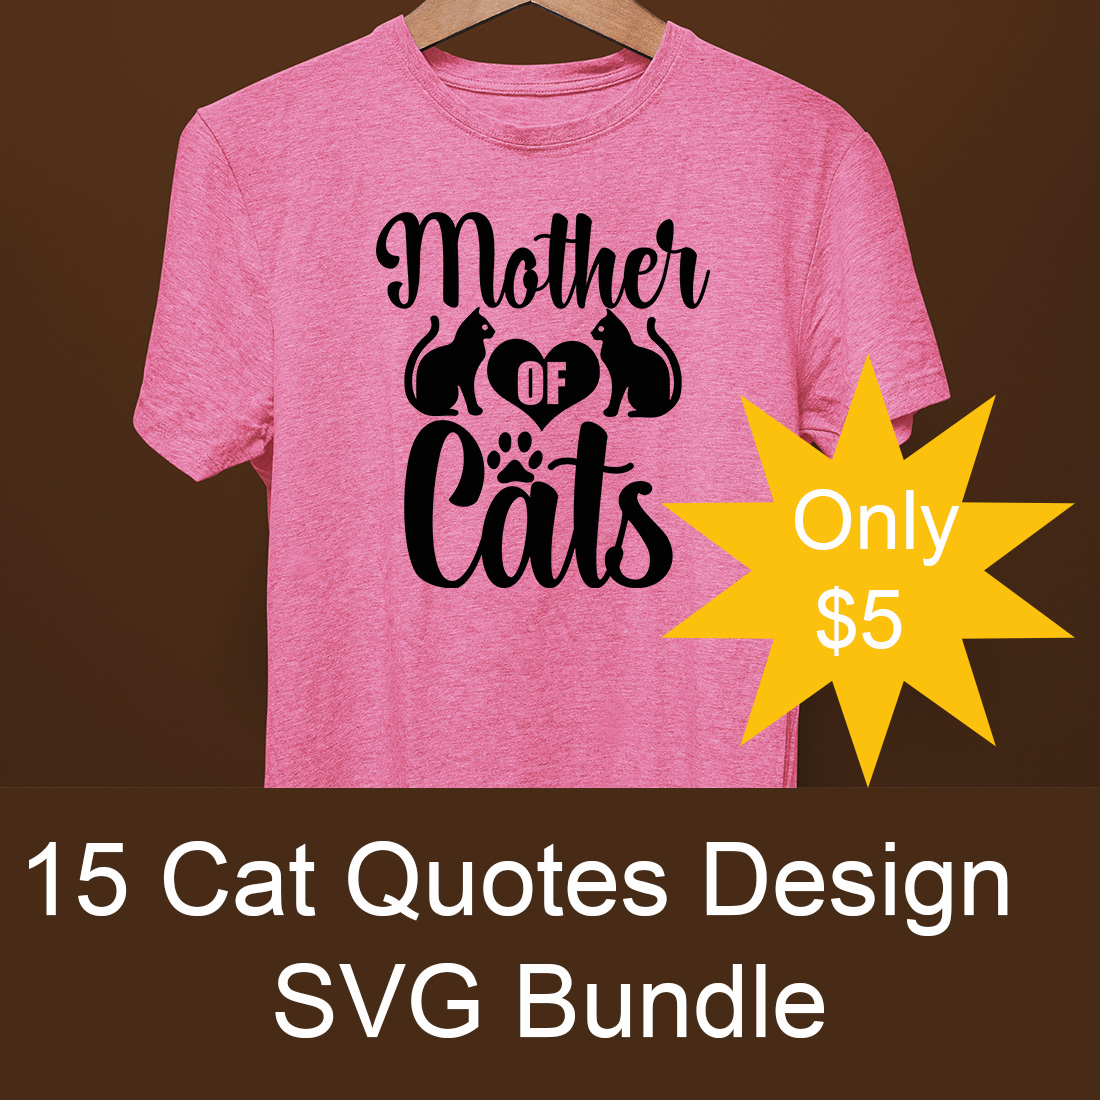 Image of a pink T-shirt with an irresistible Mother of Cats slogan